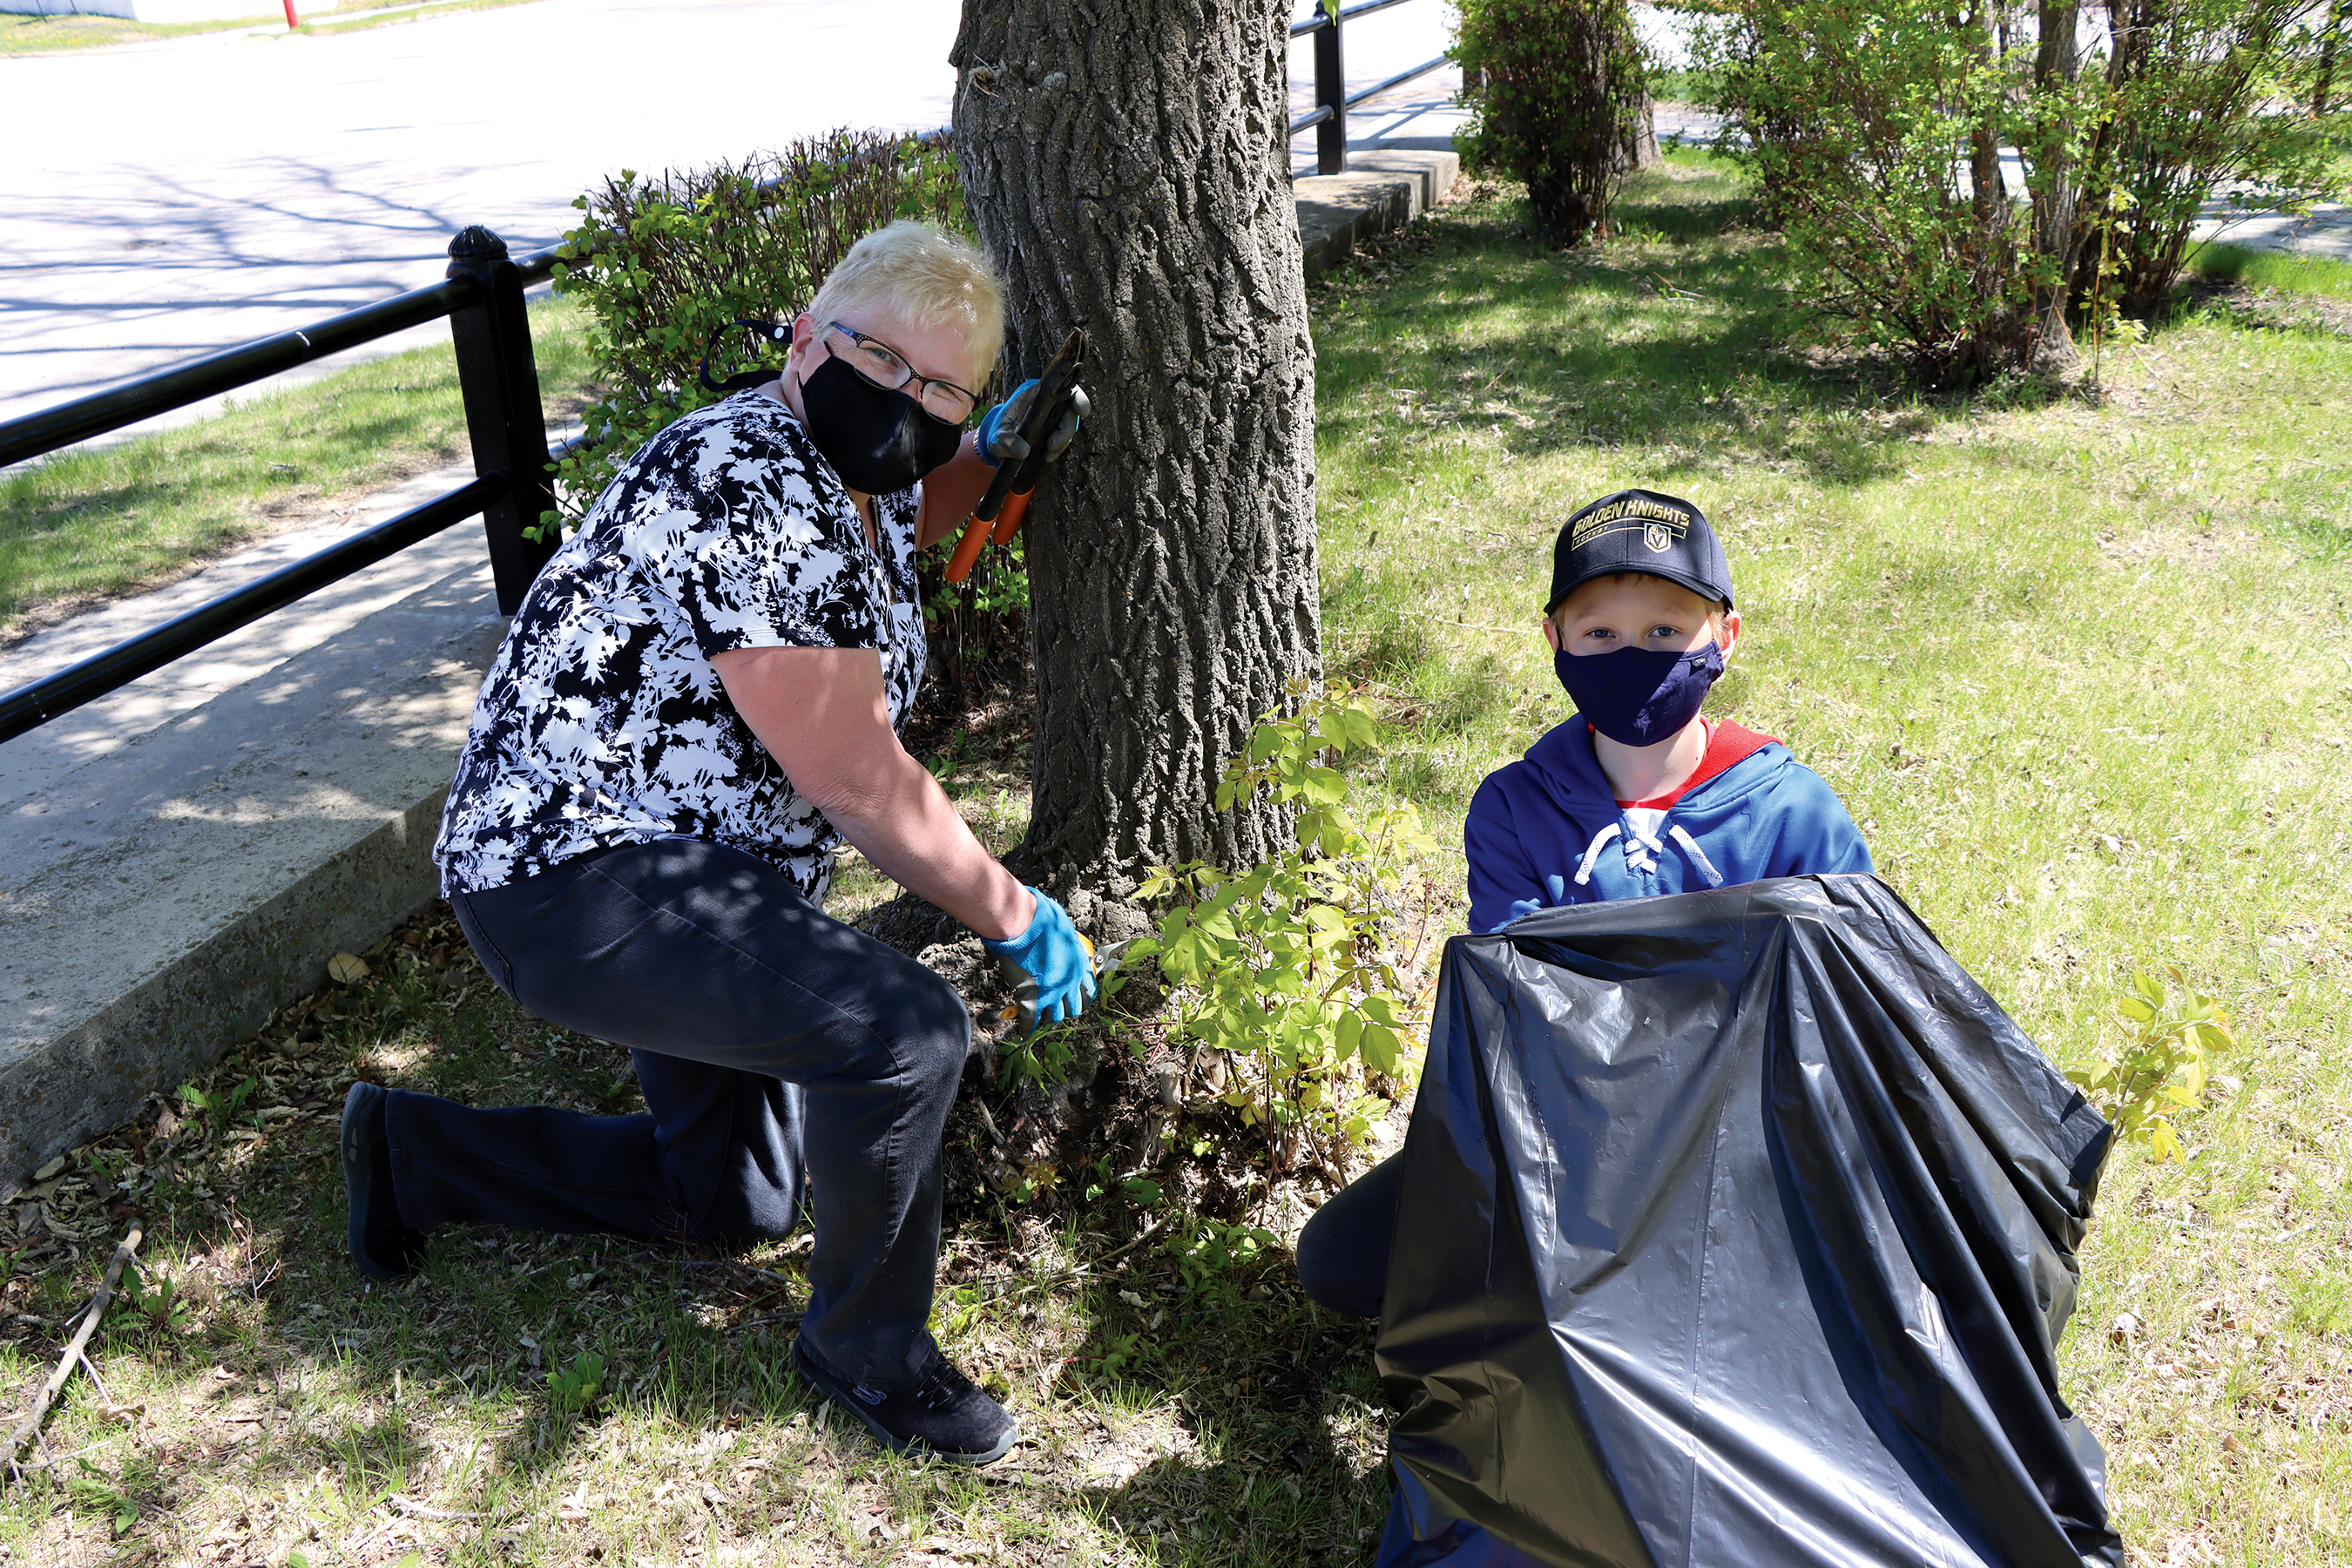 Devona Putland also lent a helping hand during the cleanup.